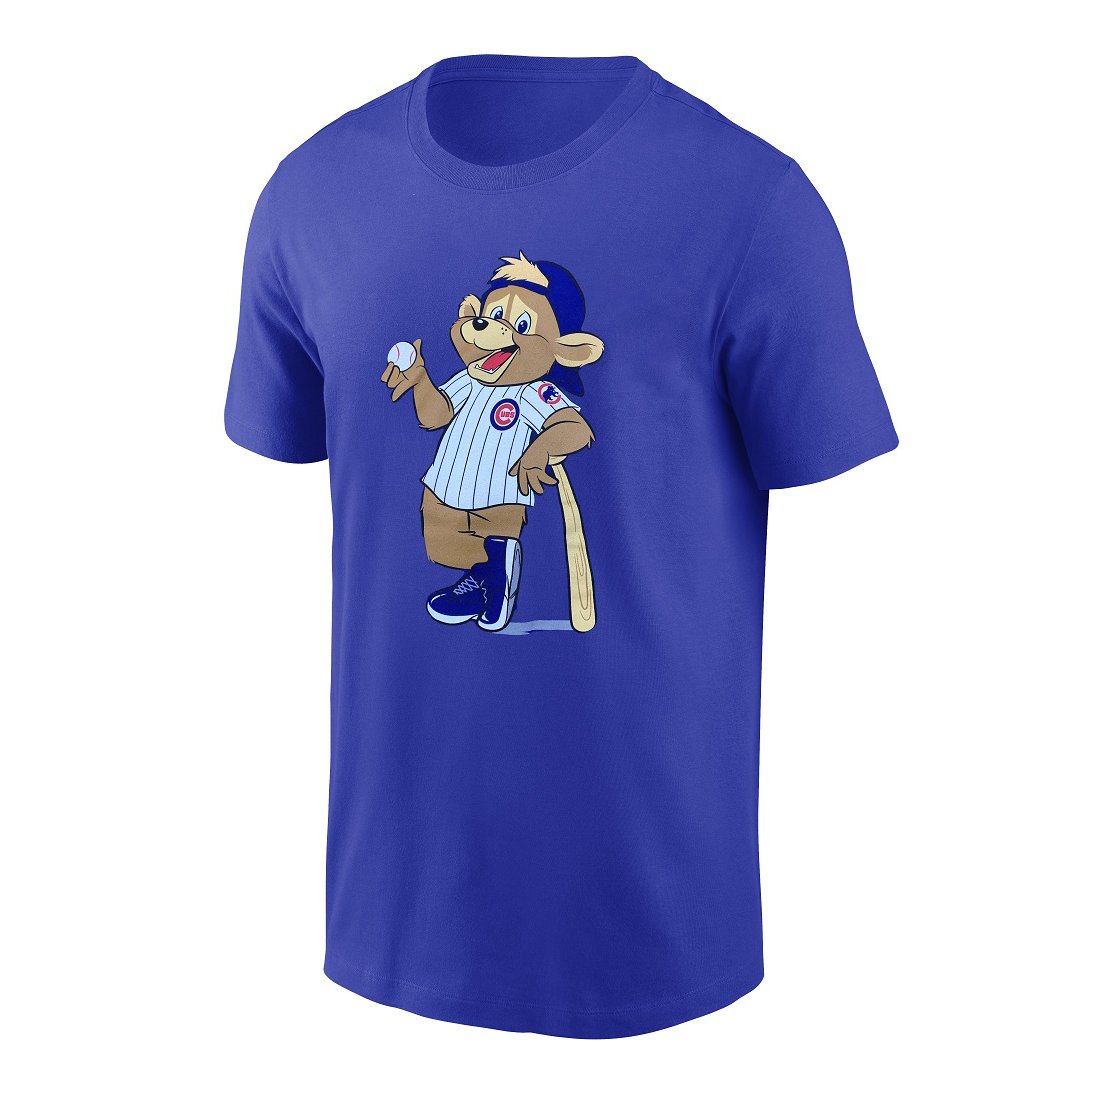 Chicago Cubs and Wrigley Field Youth Shirts – Ivy Shop